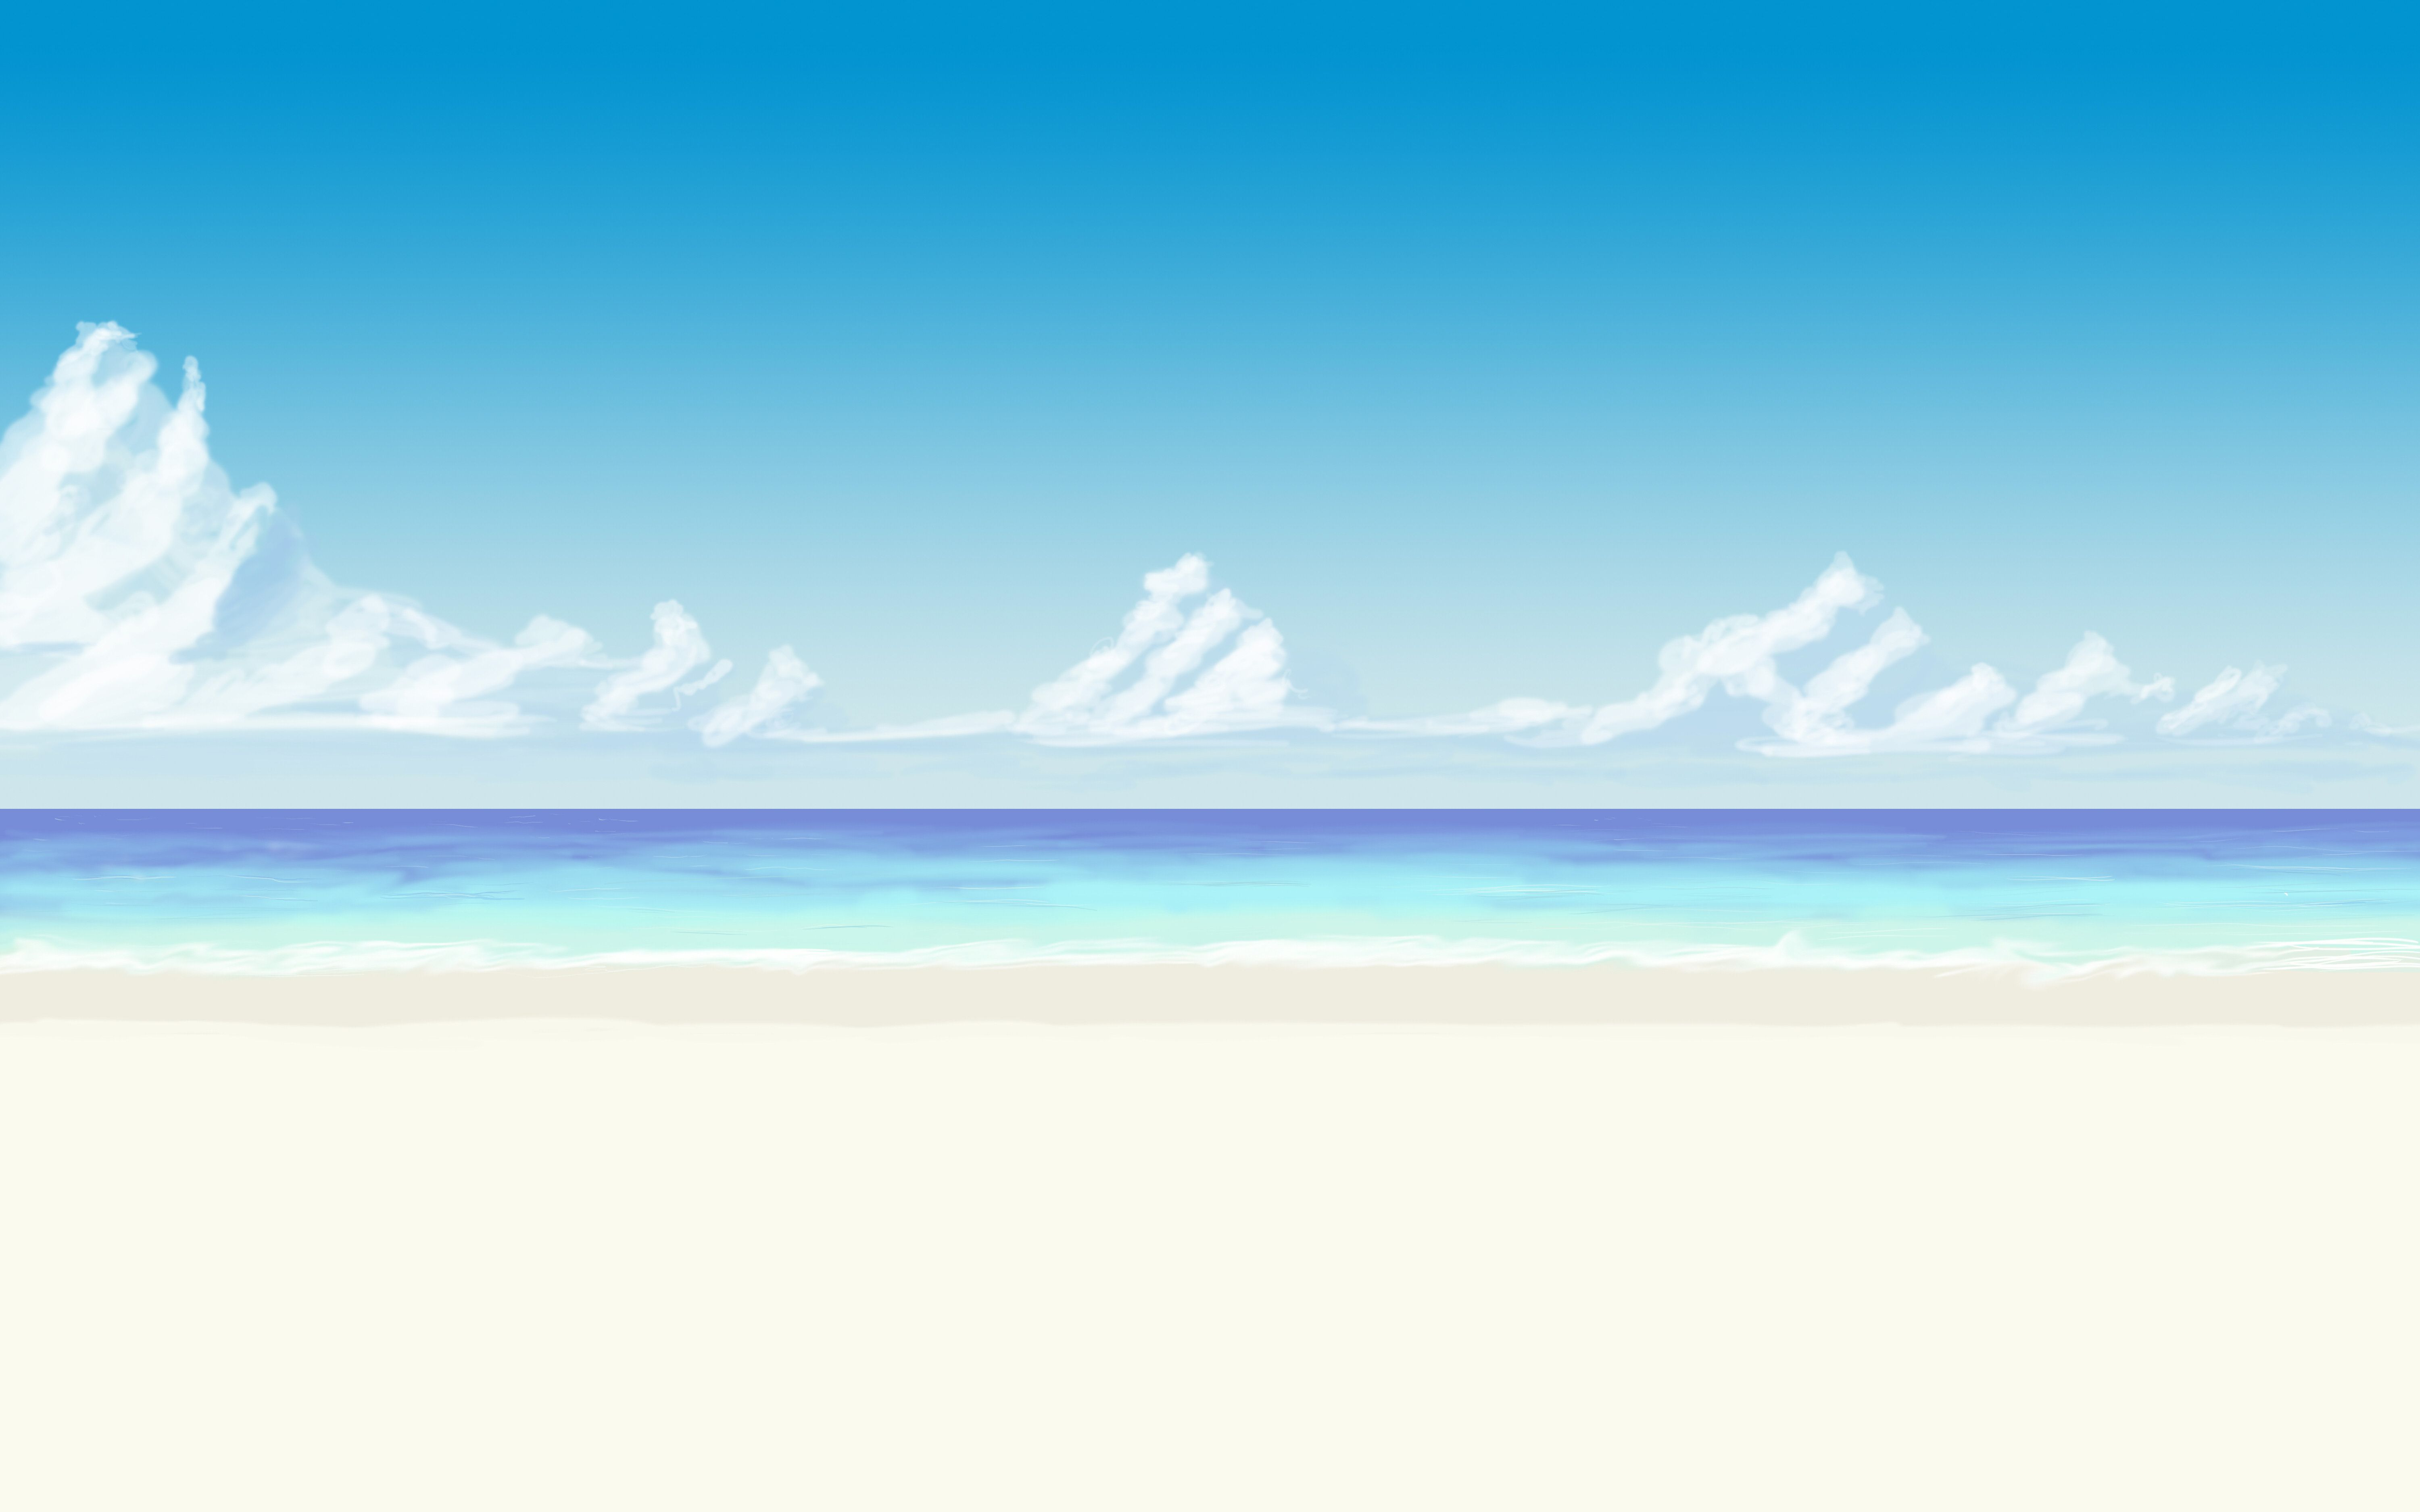 Another Anime Beach Background By Wbd Deviantart On